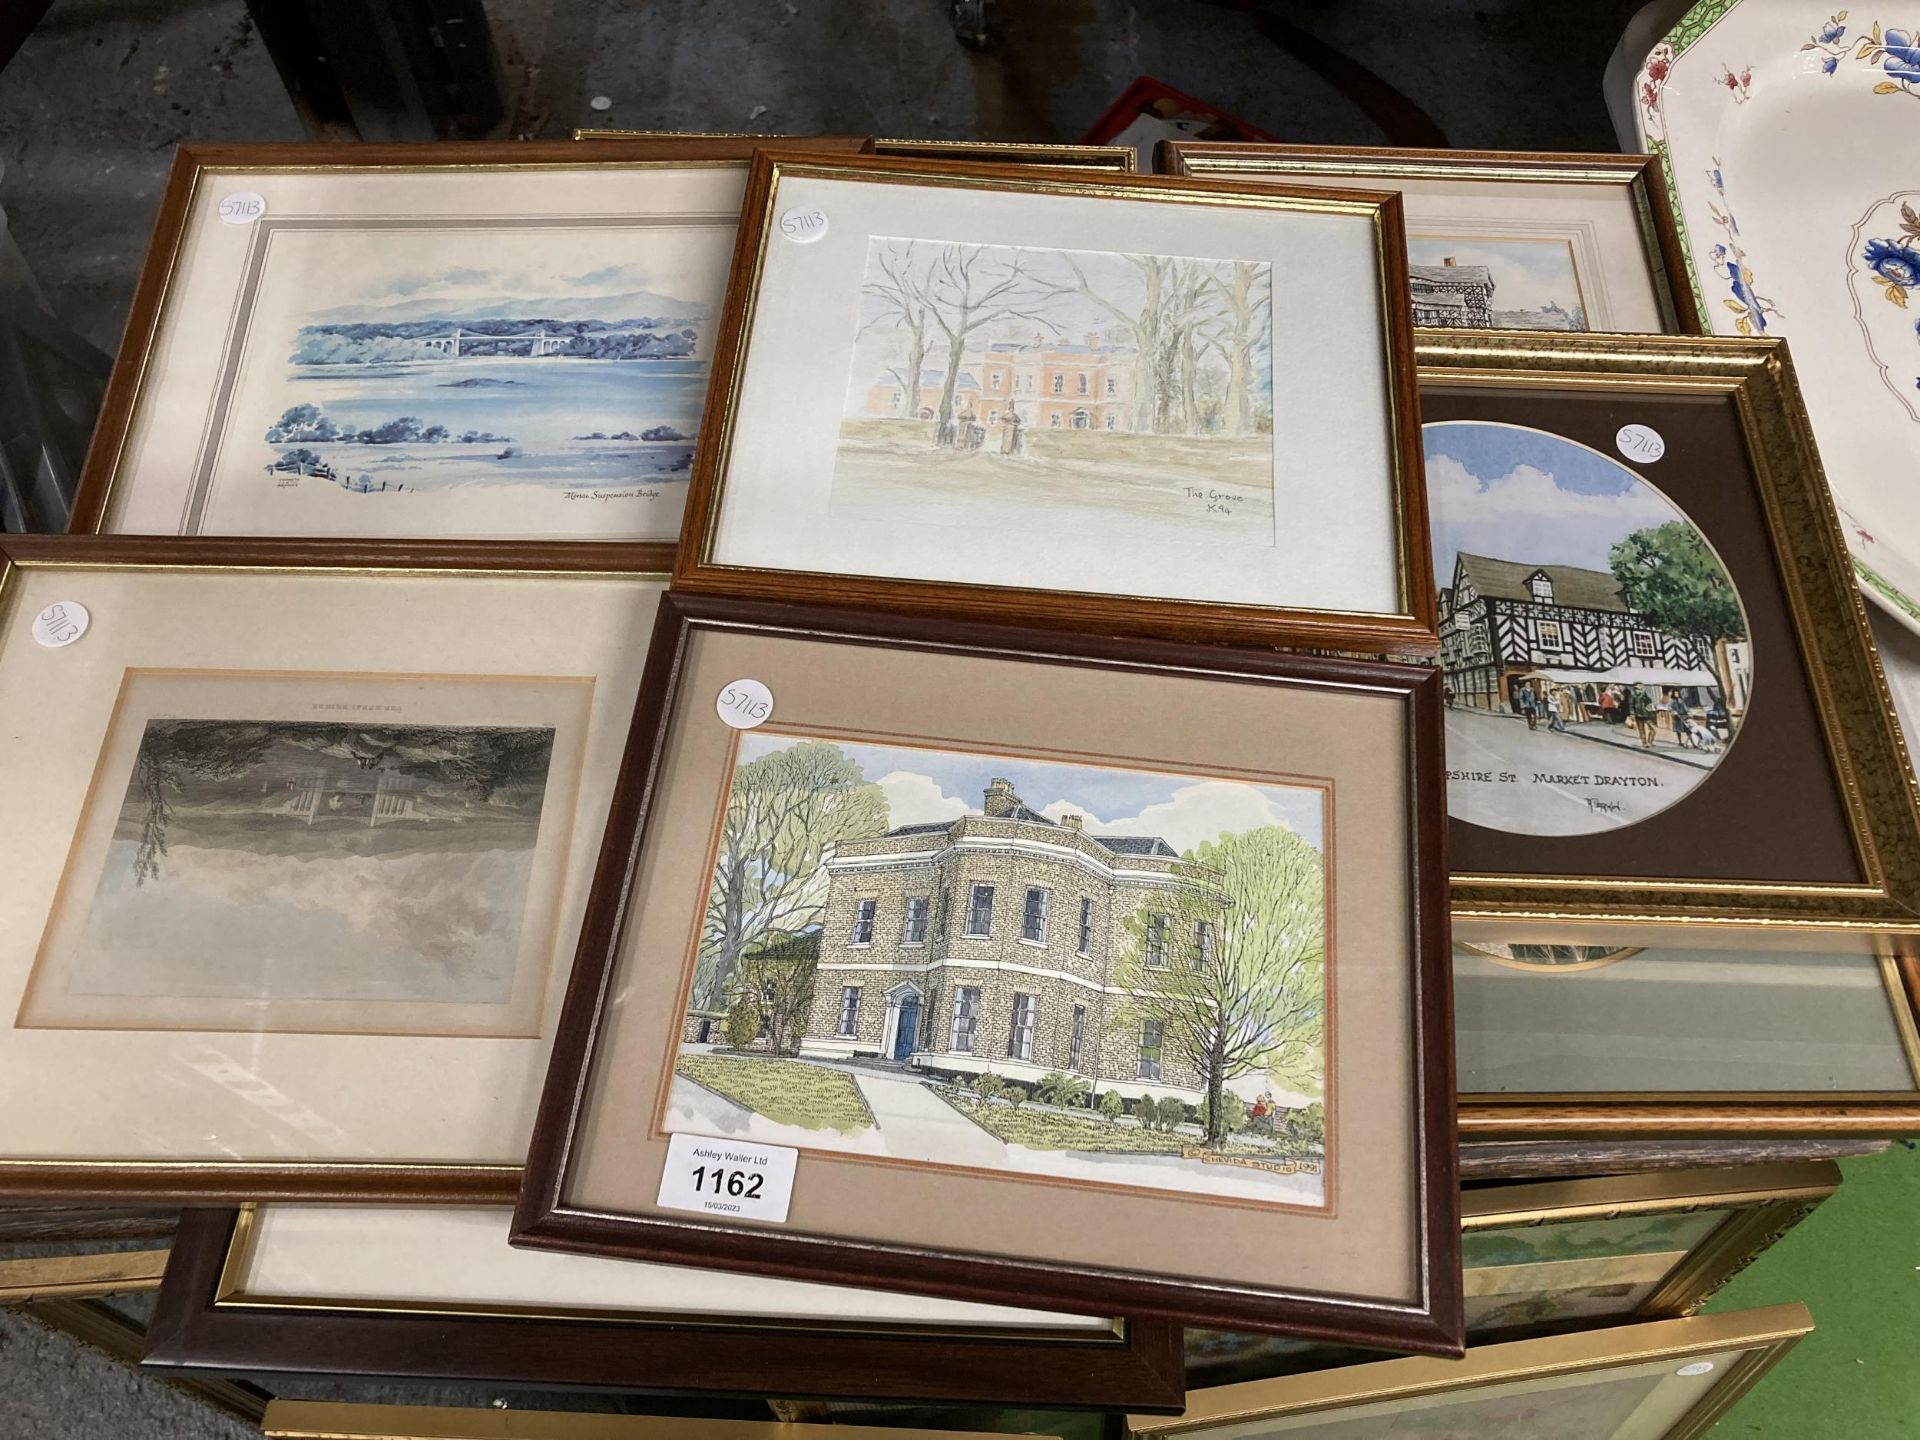 A QUANTITY OF FRAMED PRINTS TO INCLUDE BUILDINGS, ETC - 9 IN TOTAL